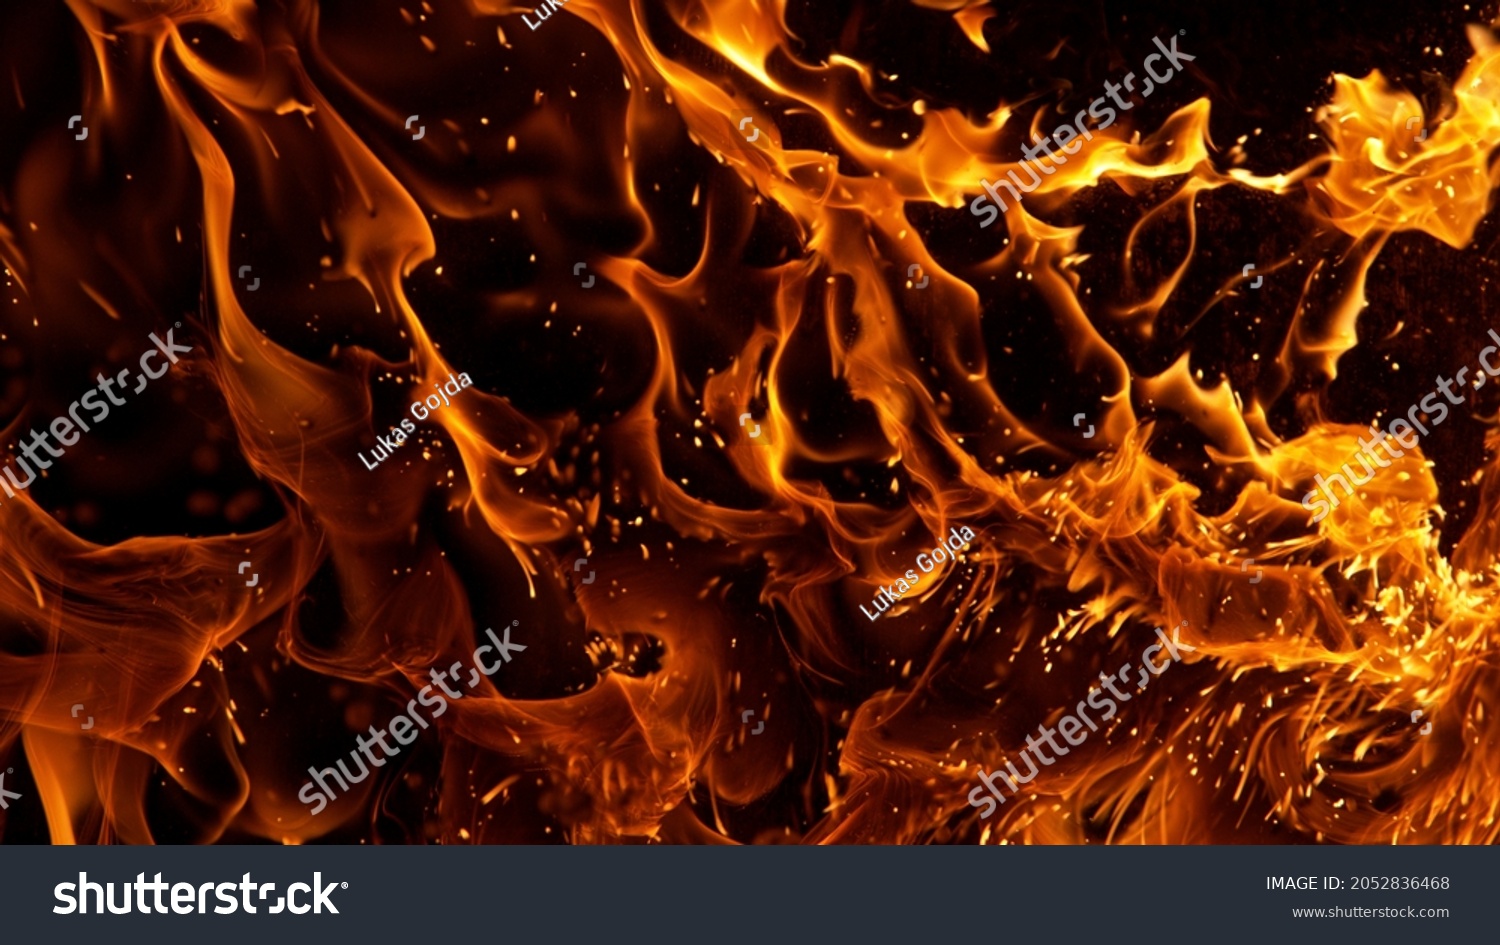 Fire Flames Isolated on Black Background, close-up. #2052836468